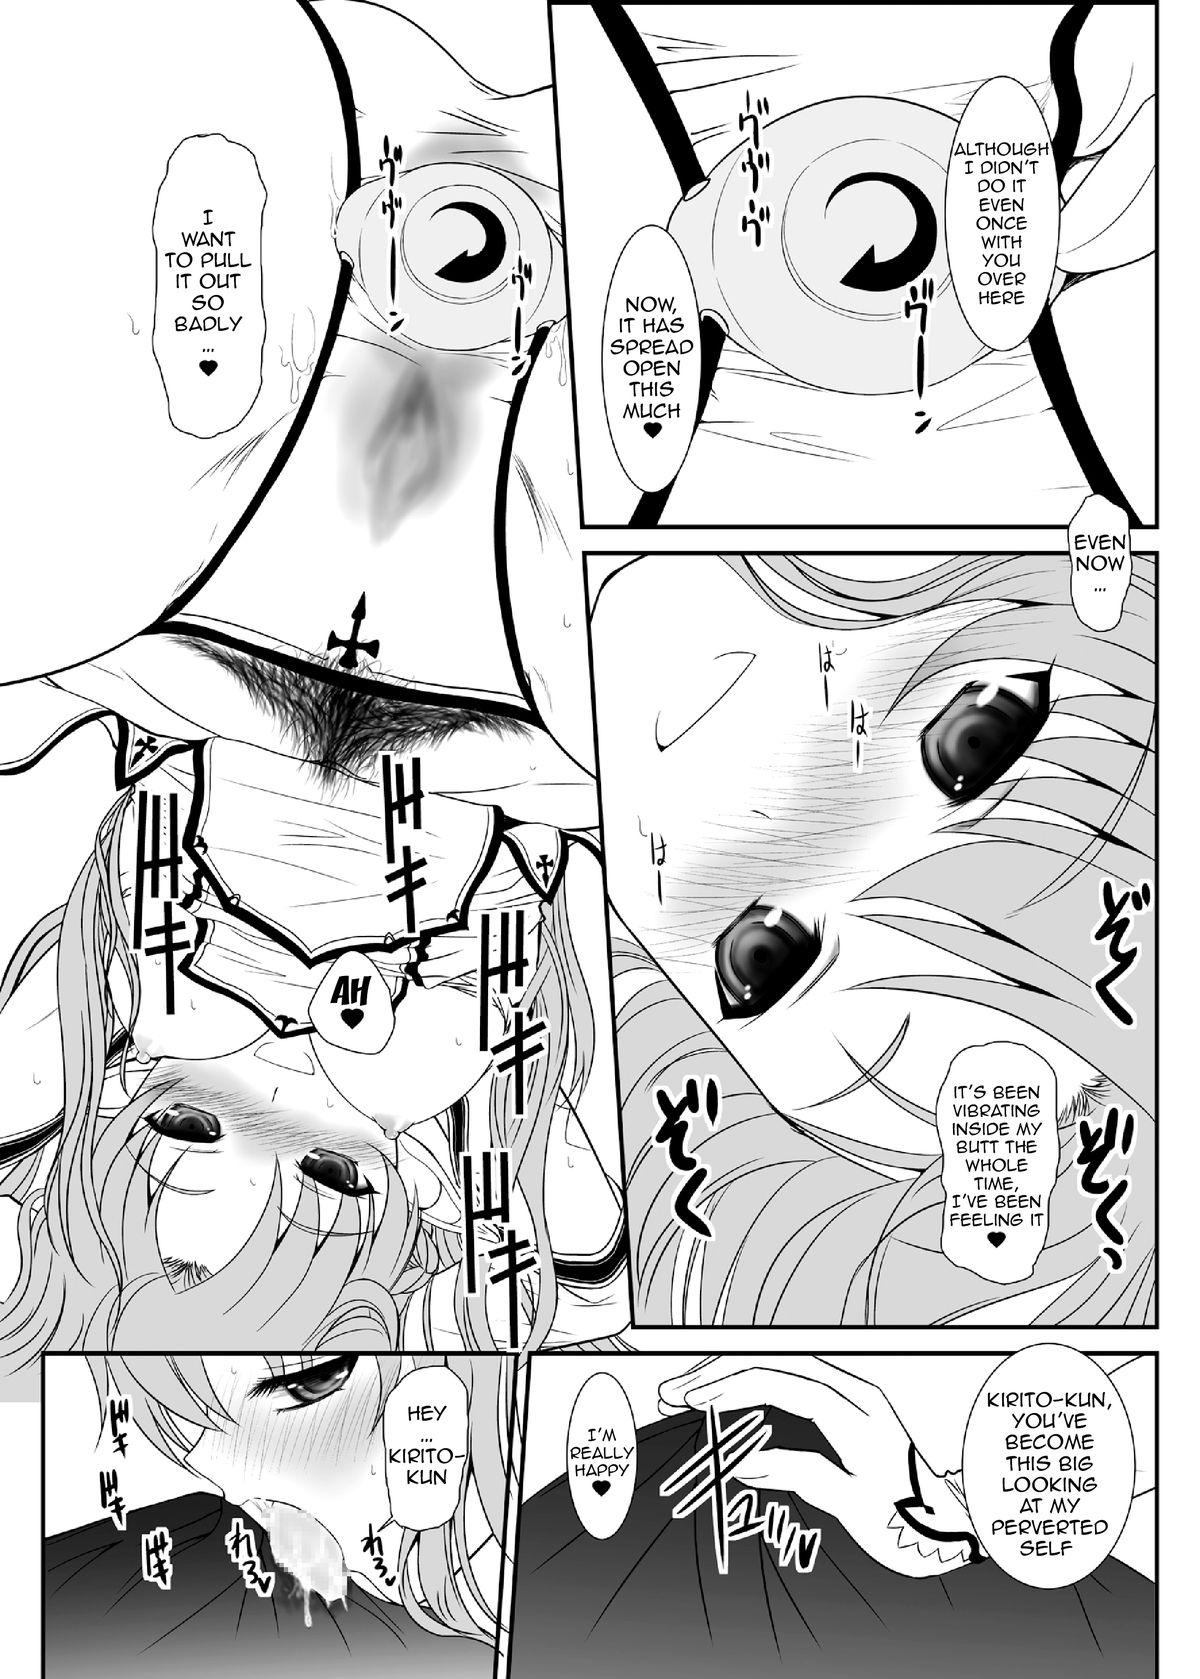 Pussy Sex Slave Asuna On-Demand 2 - Sword art online Gayhardcore - Page 12